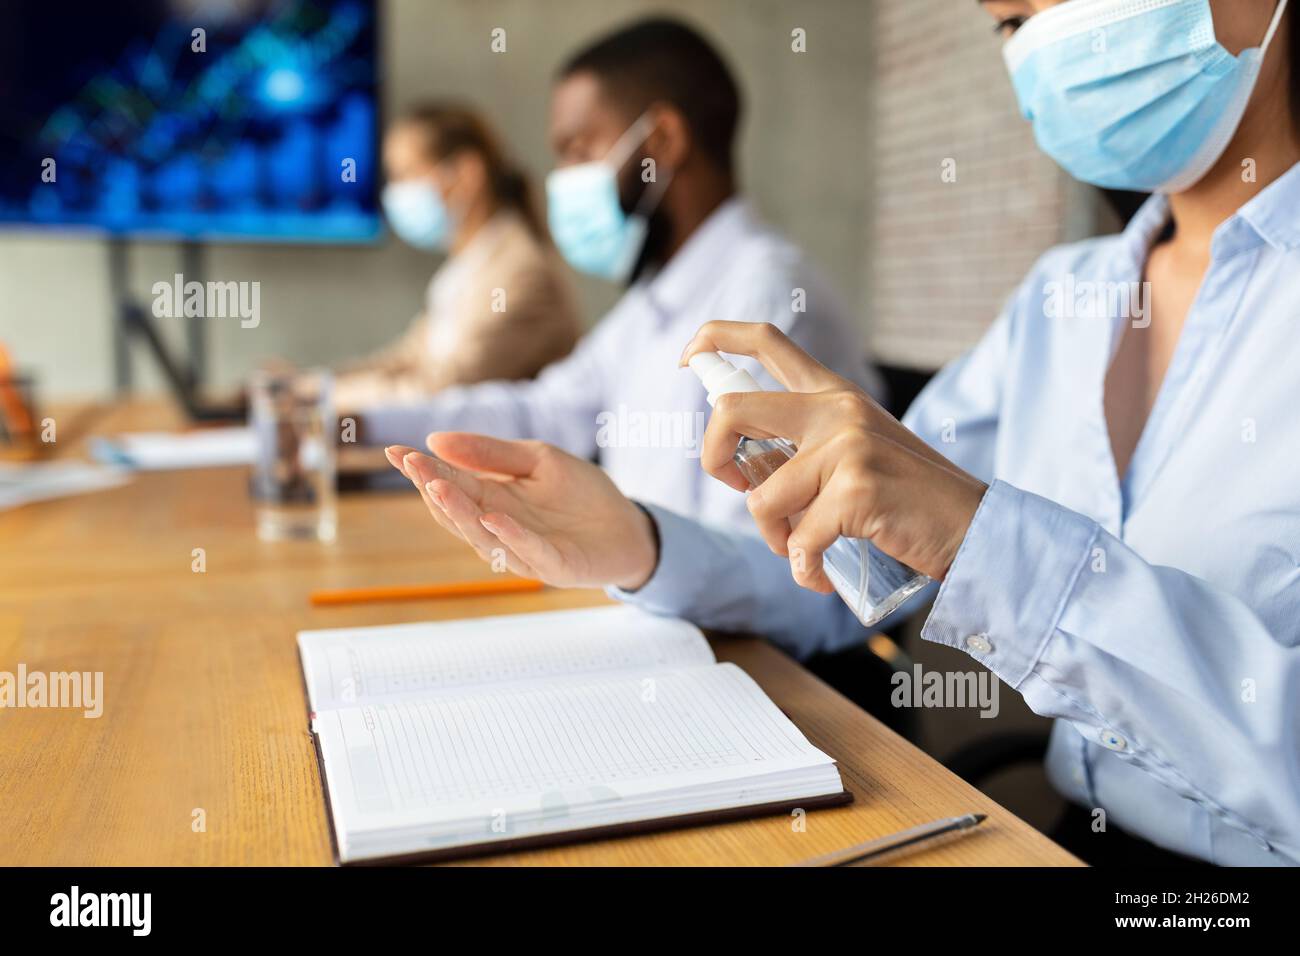 Female Employee In Face Mask Applying Disinfectant Spray On Hands In Office Stock Photo